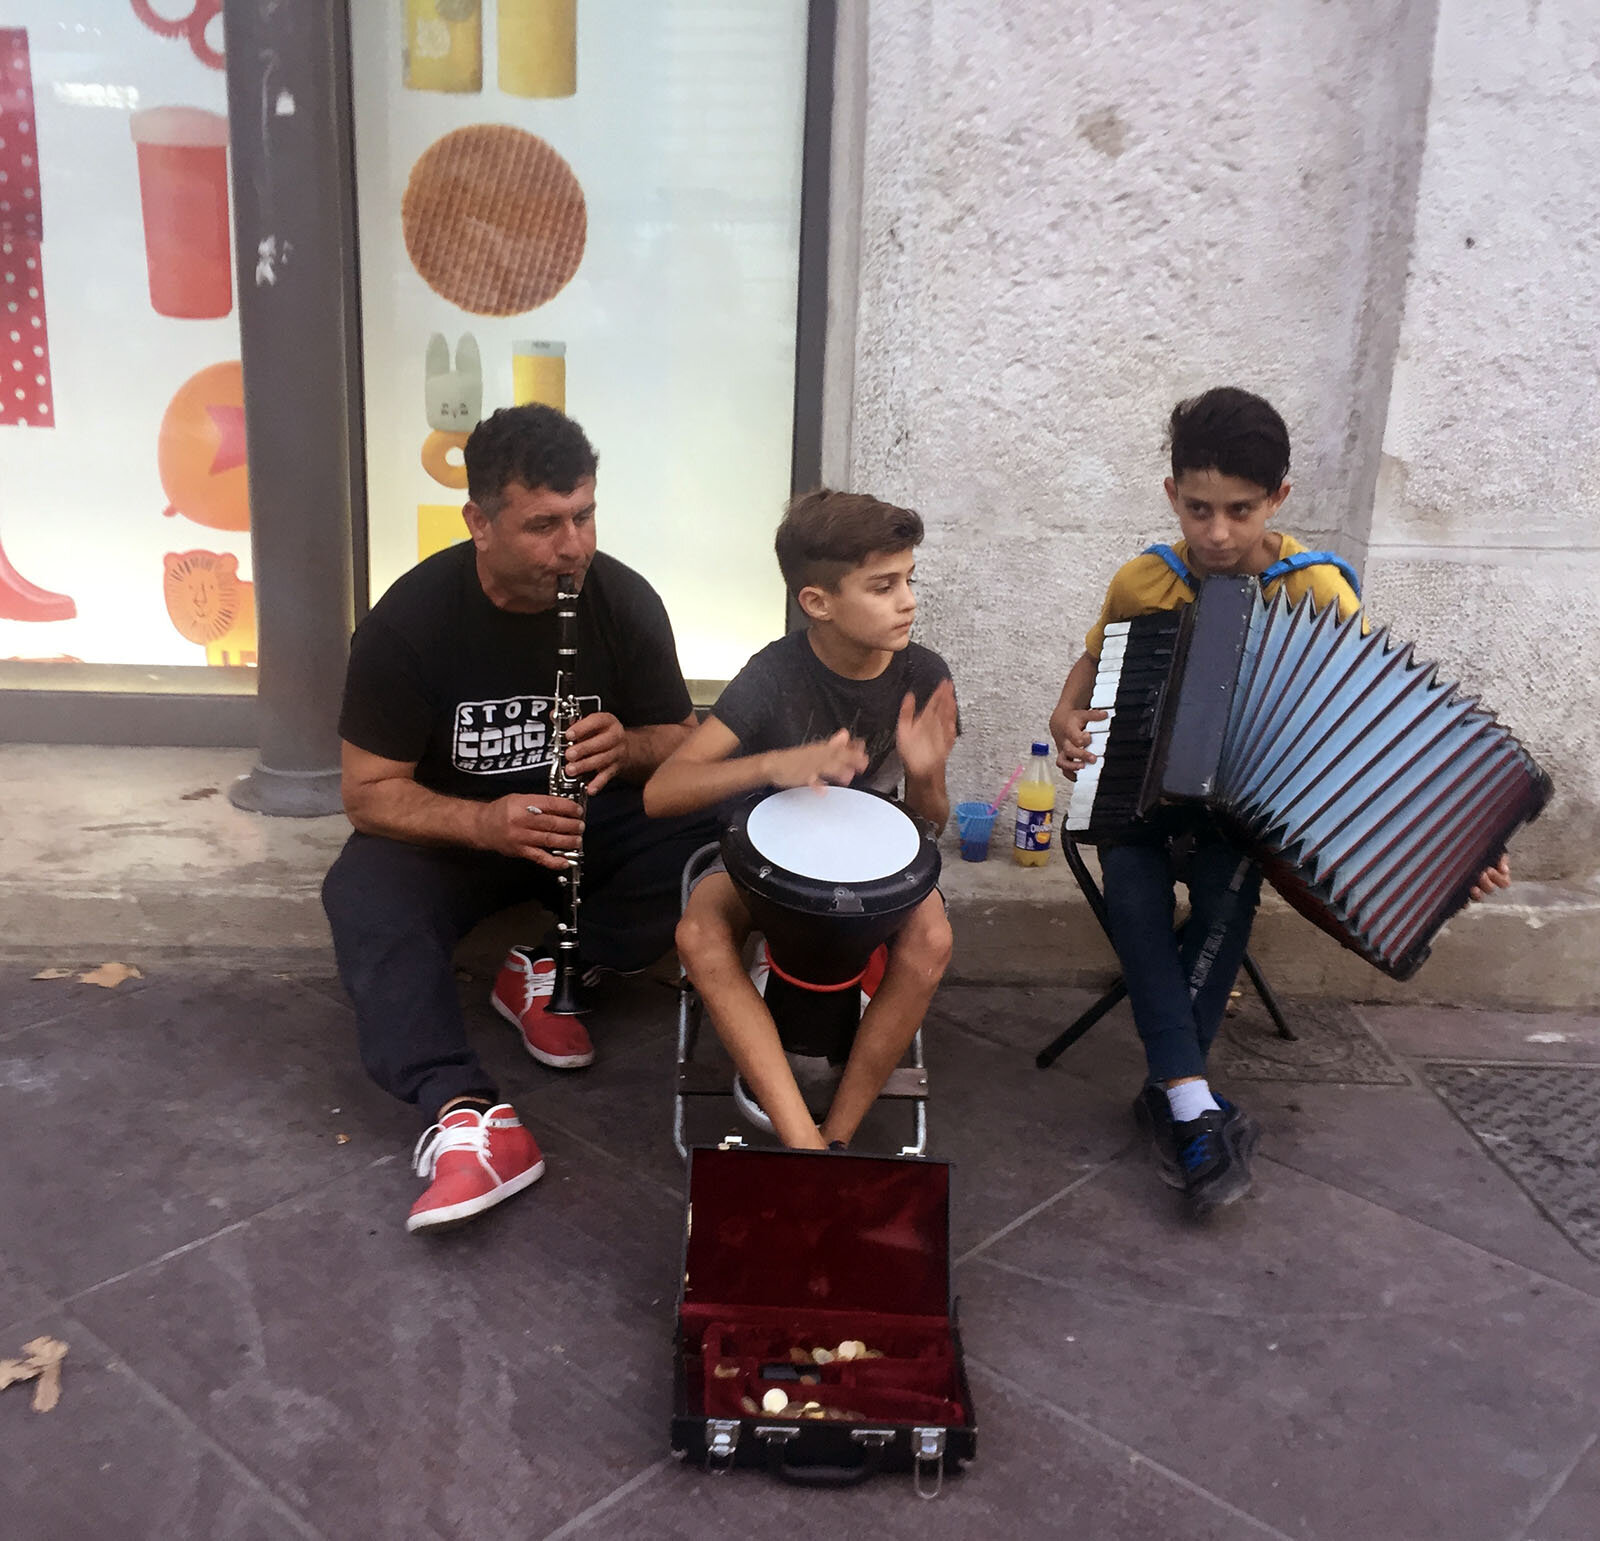 The family band of La Canebière.